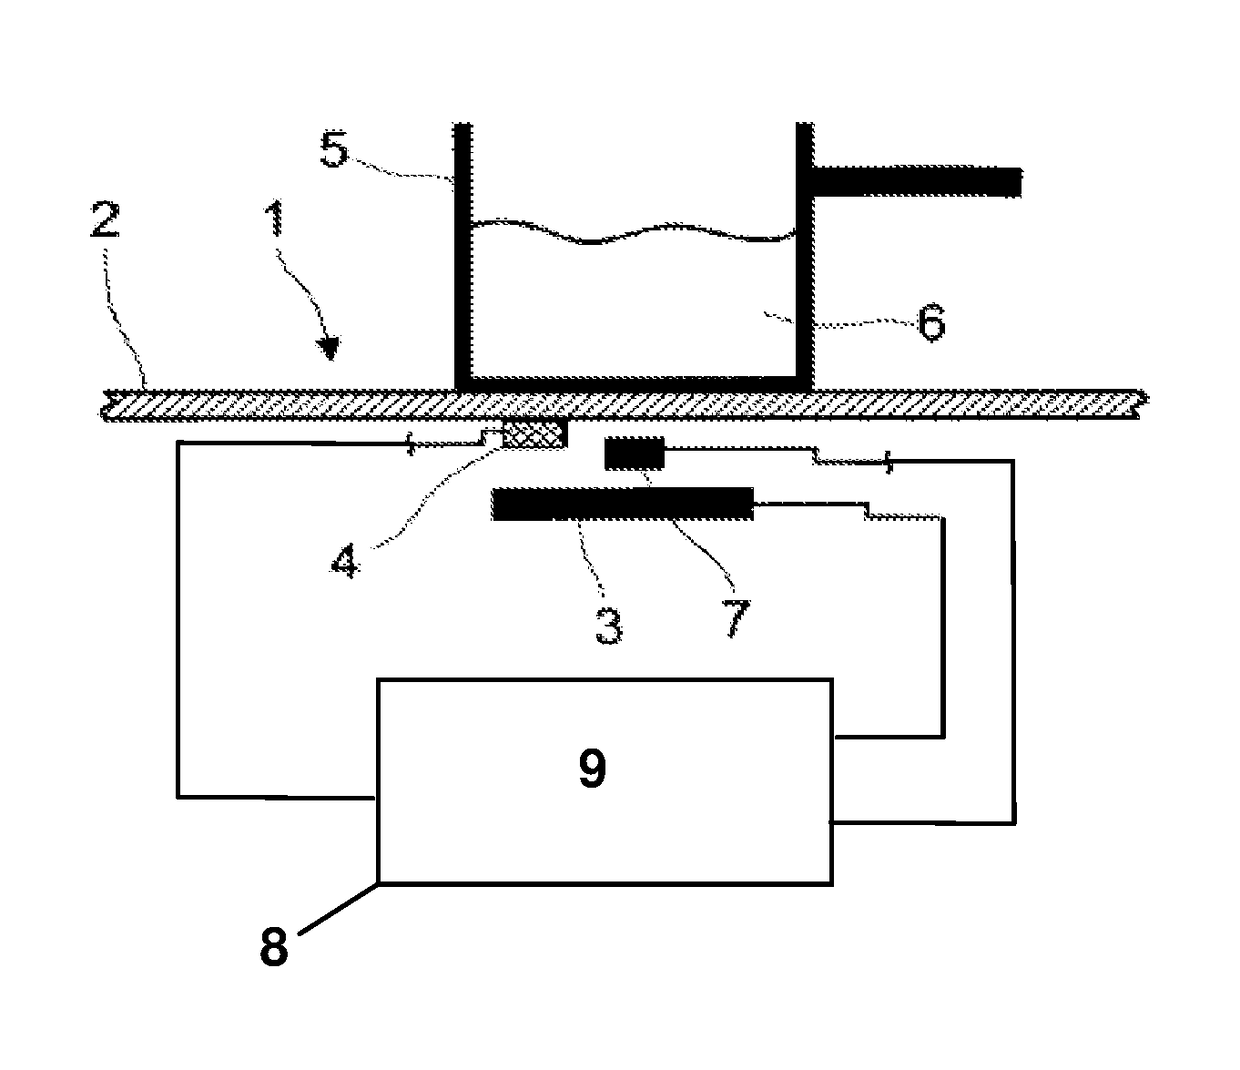 Induction cooking device for temperature-controlled cooking